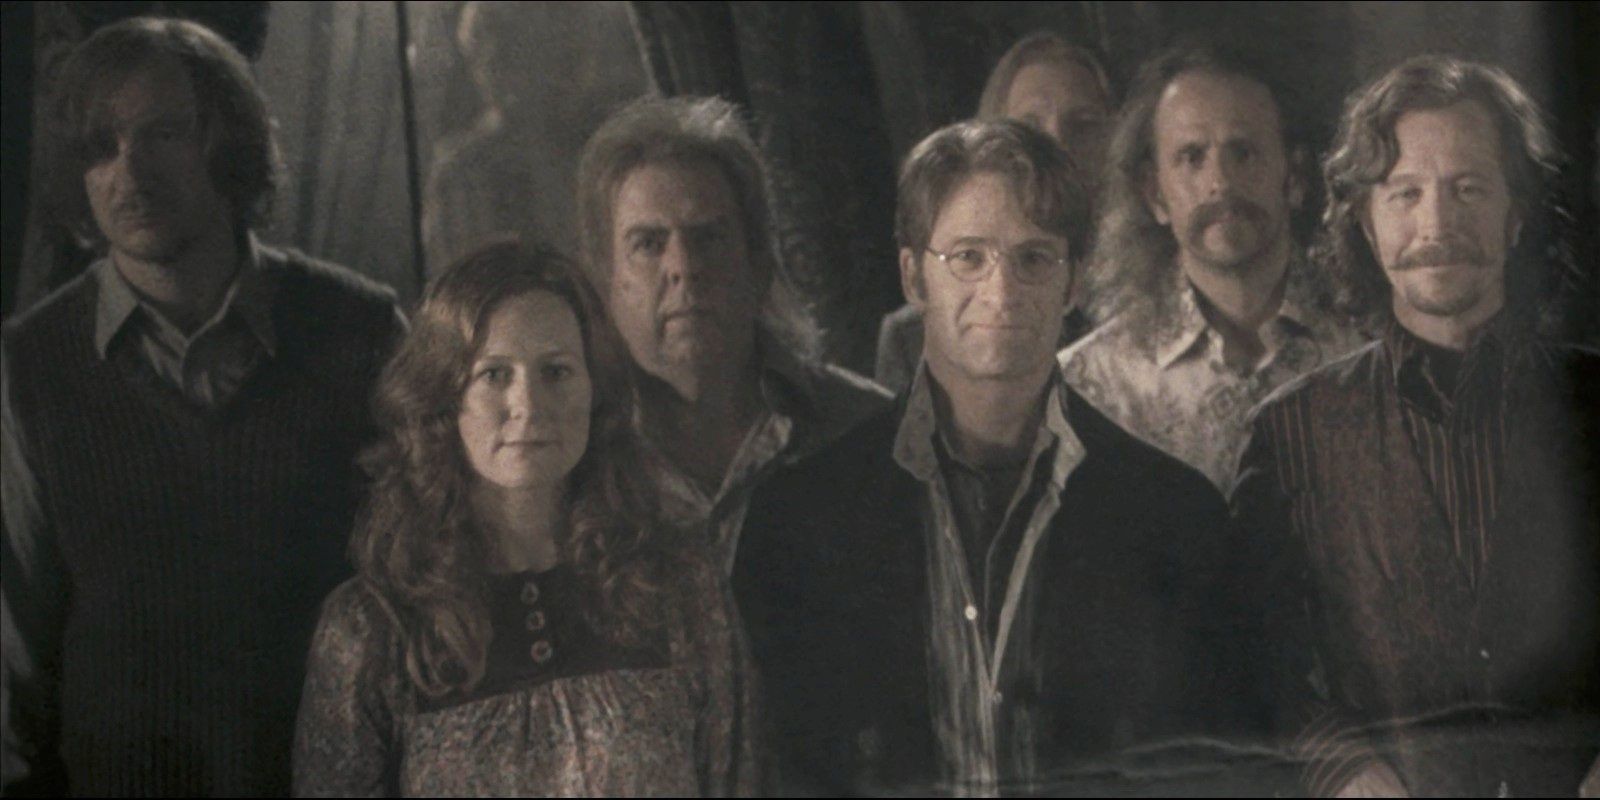 original Order of the phoenix poses for a group photo